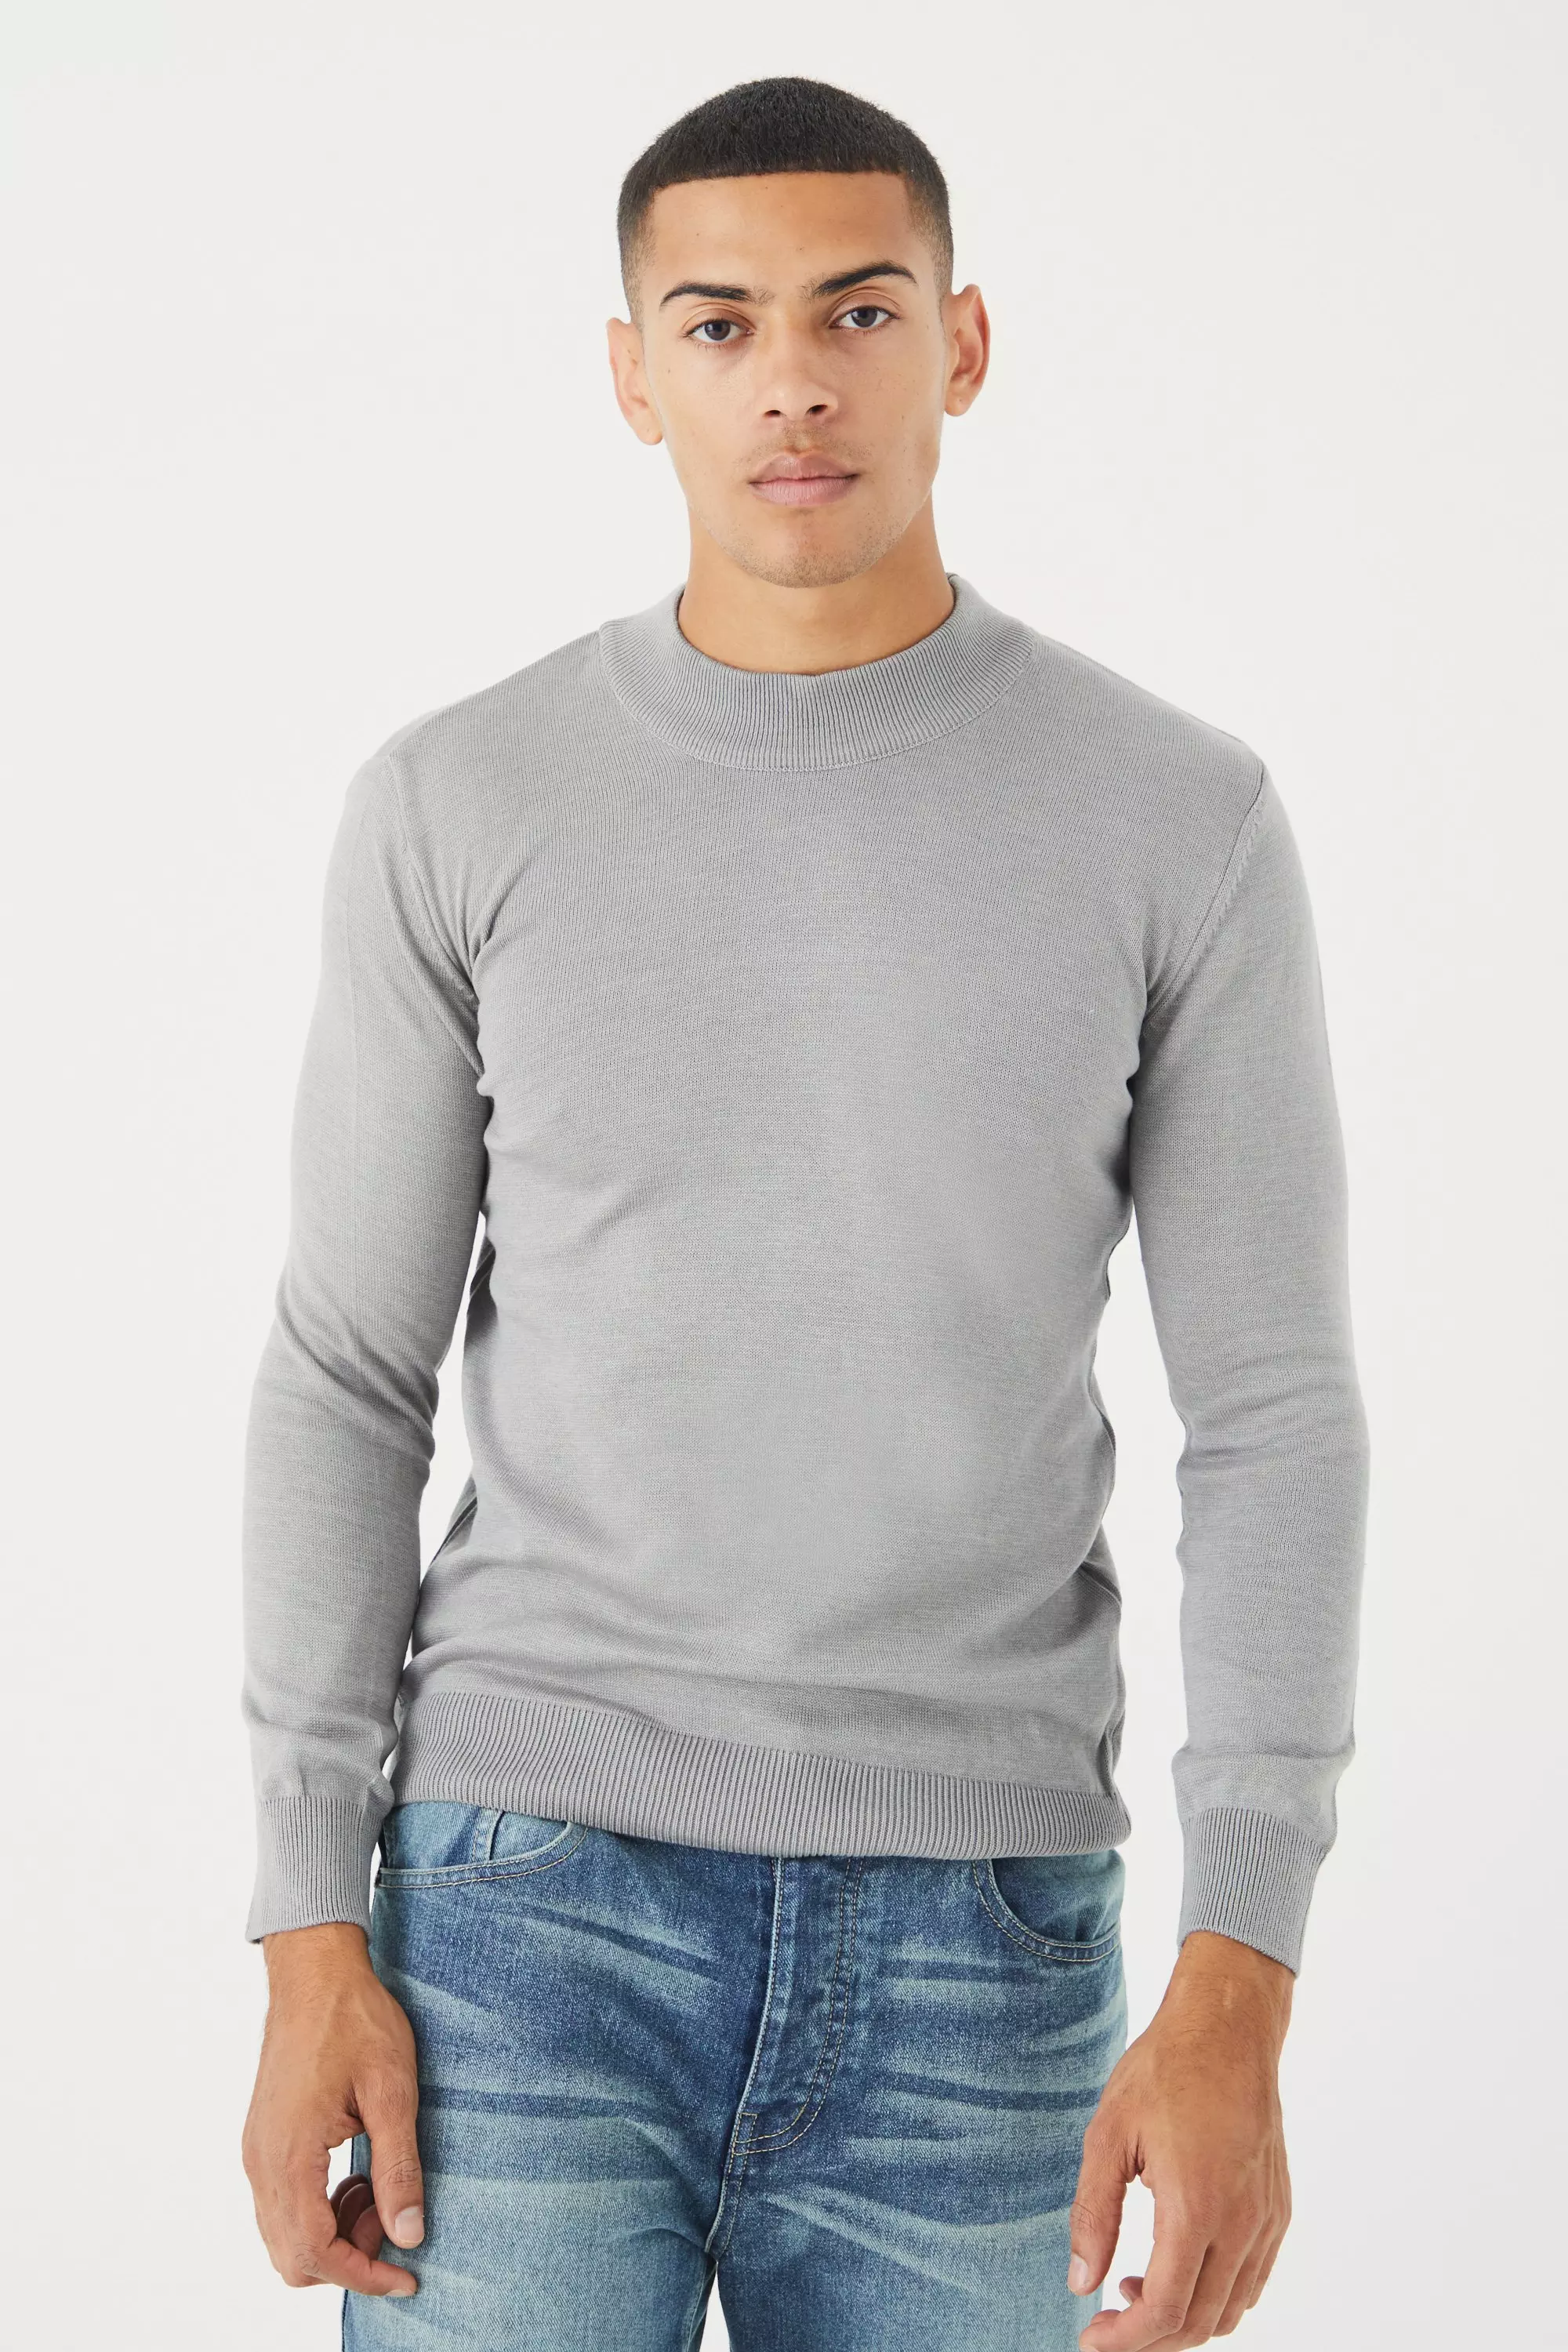 Long Sleeve Extended Neck Sweater Grey